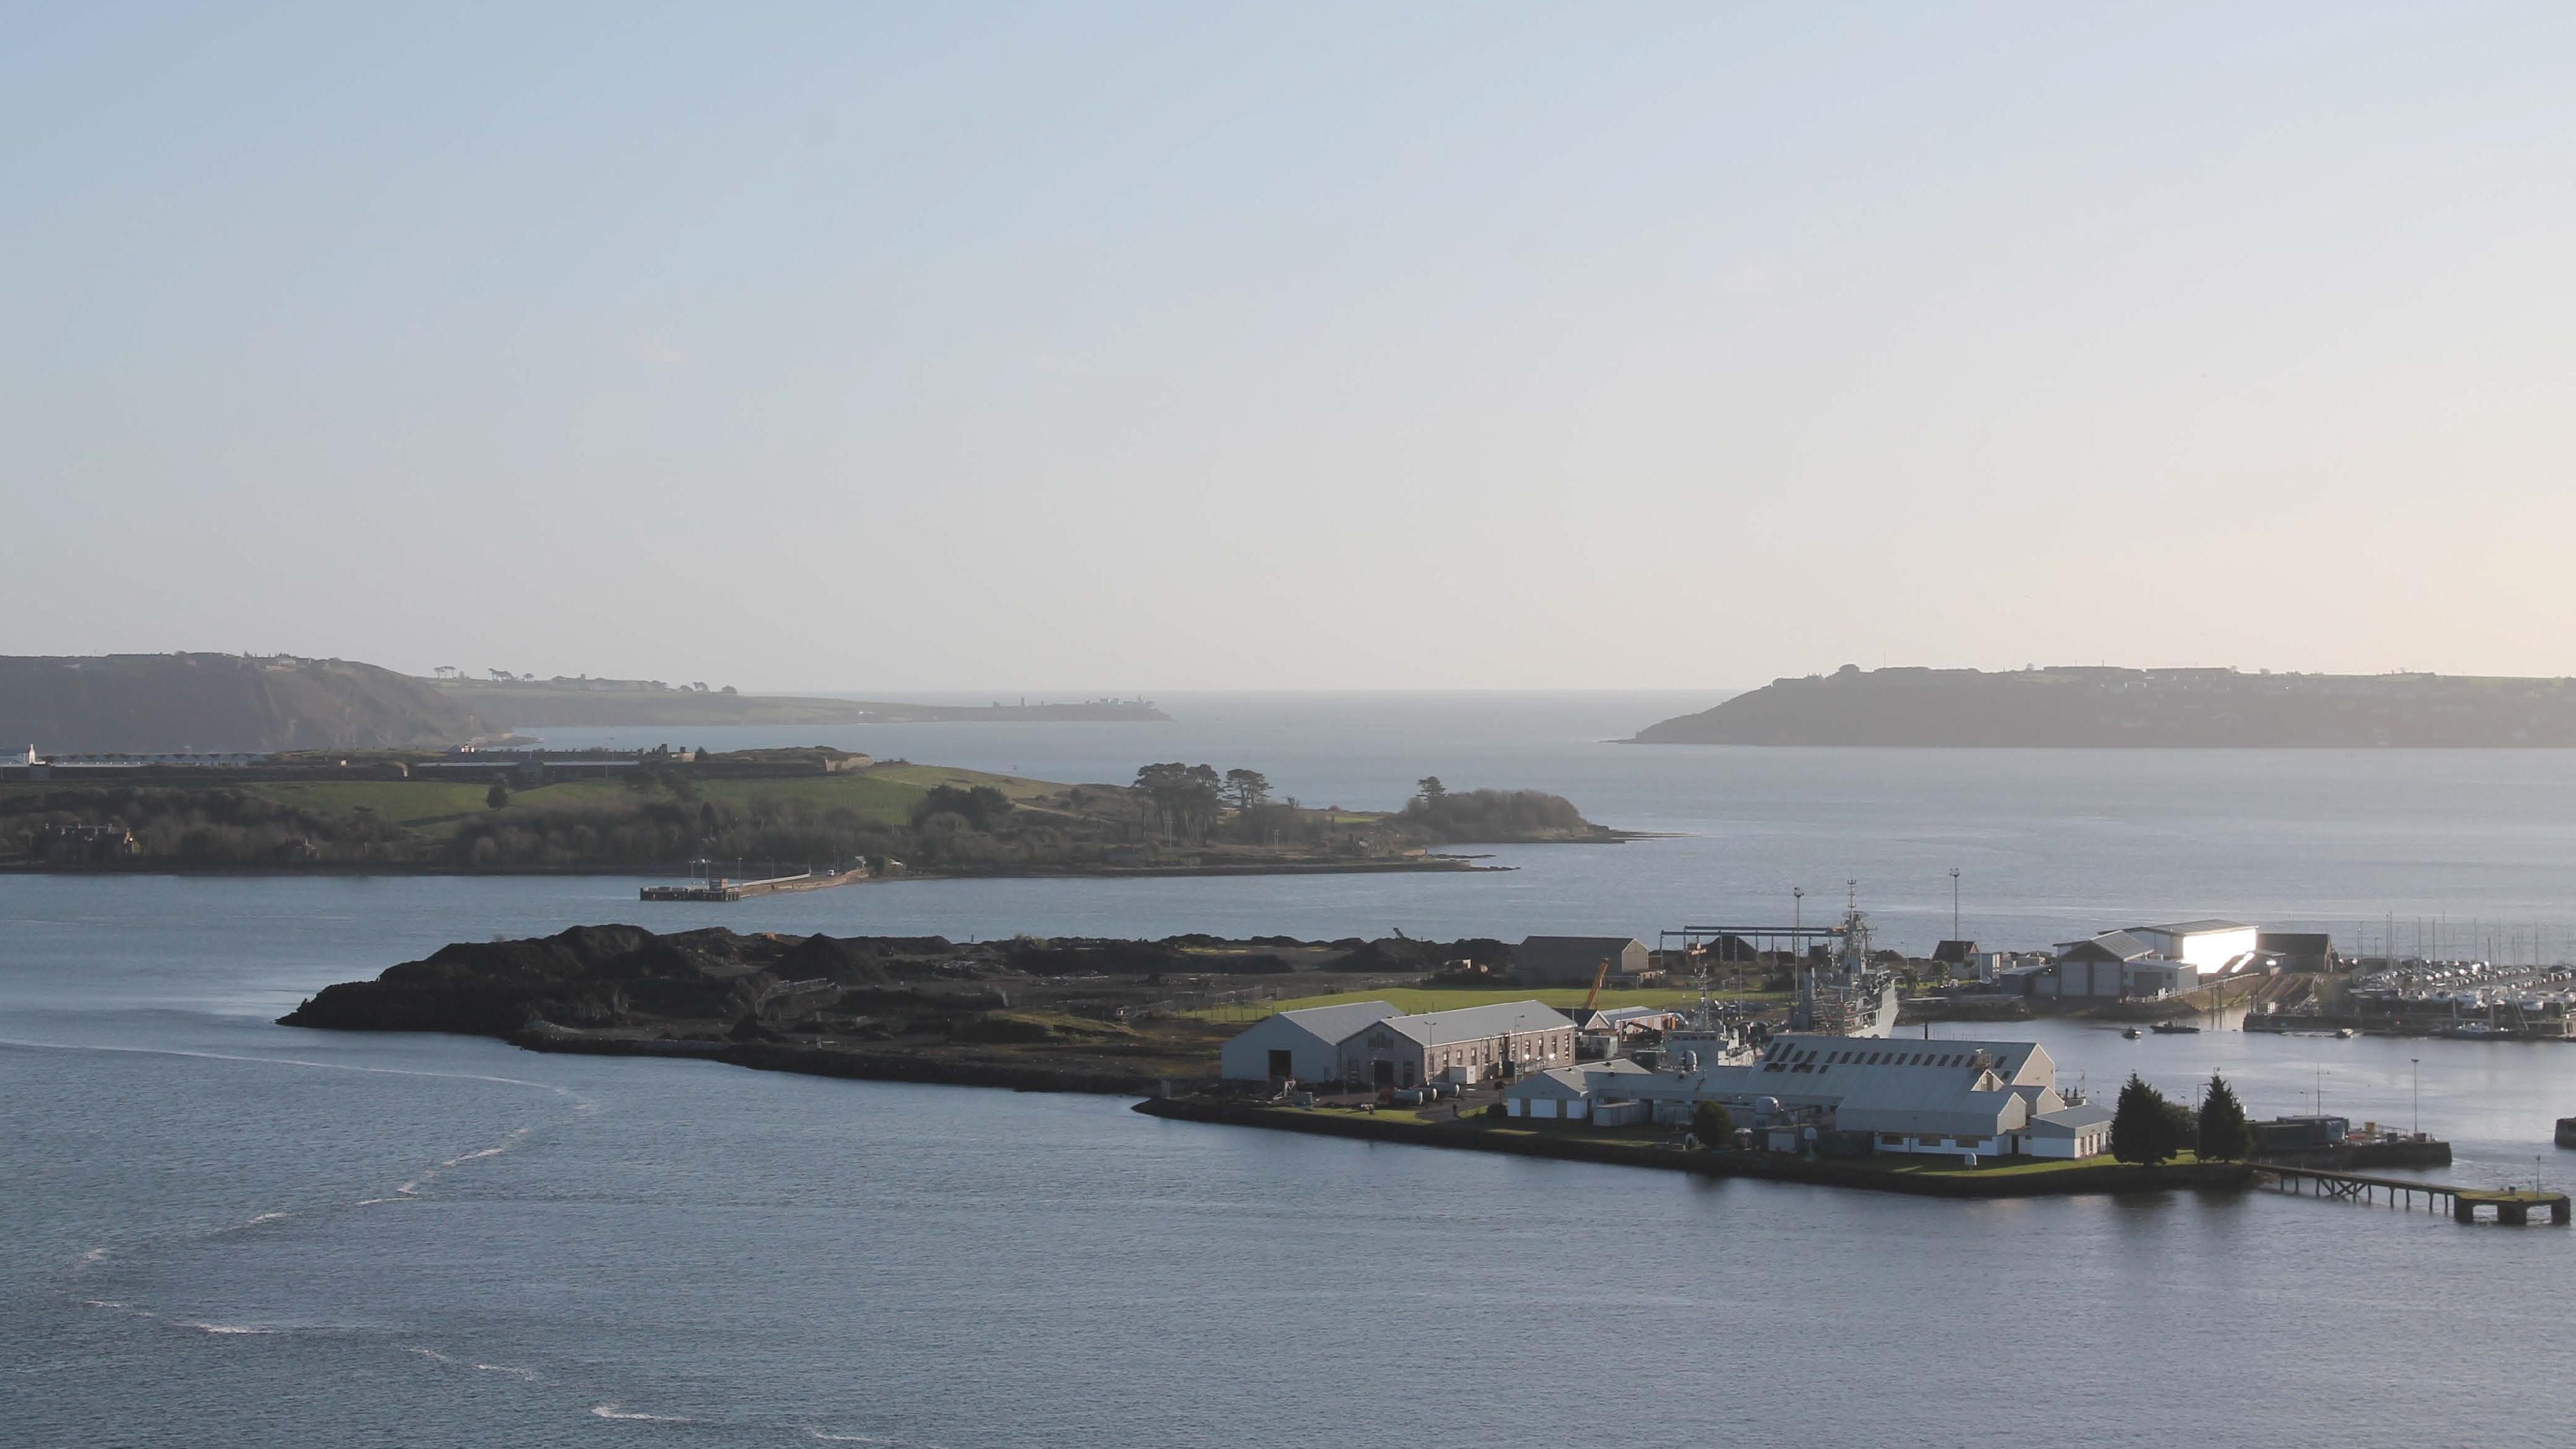 Haulbowline Island East Tip Remediation Works to Commence